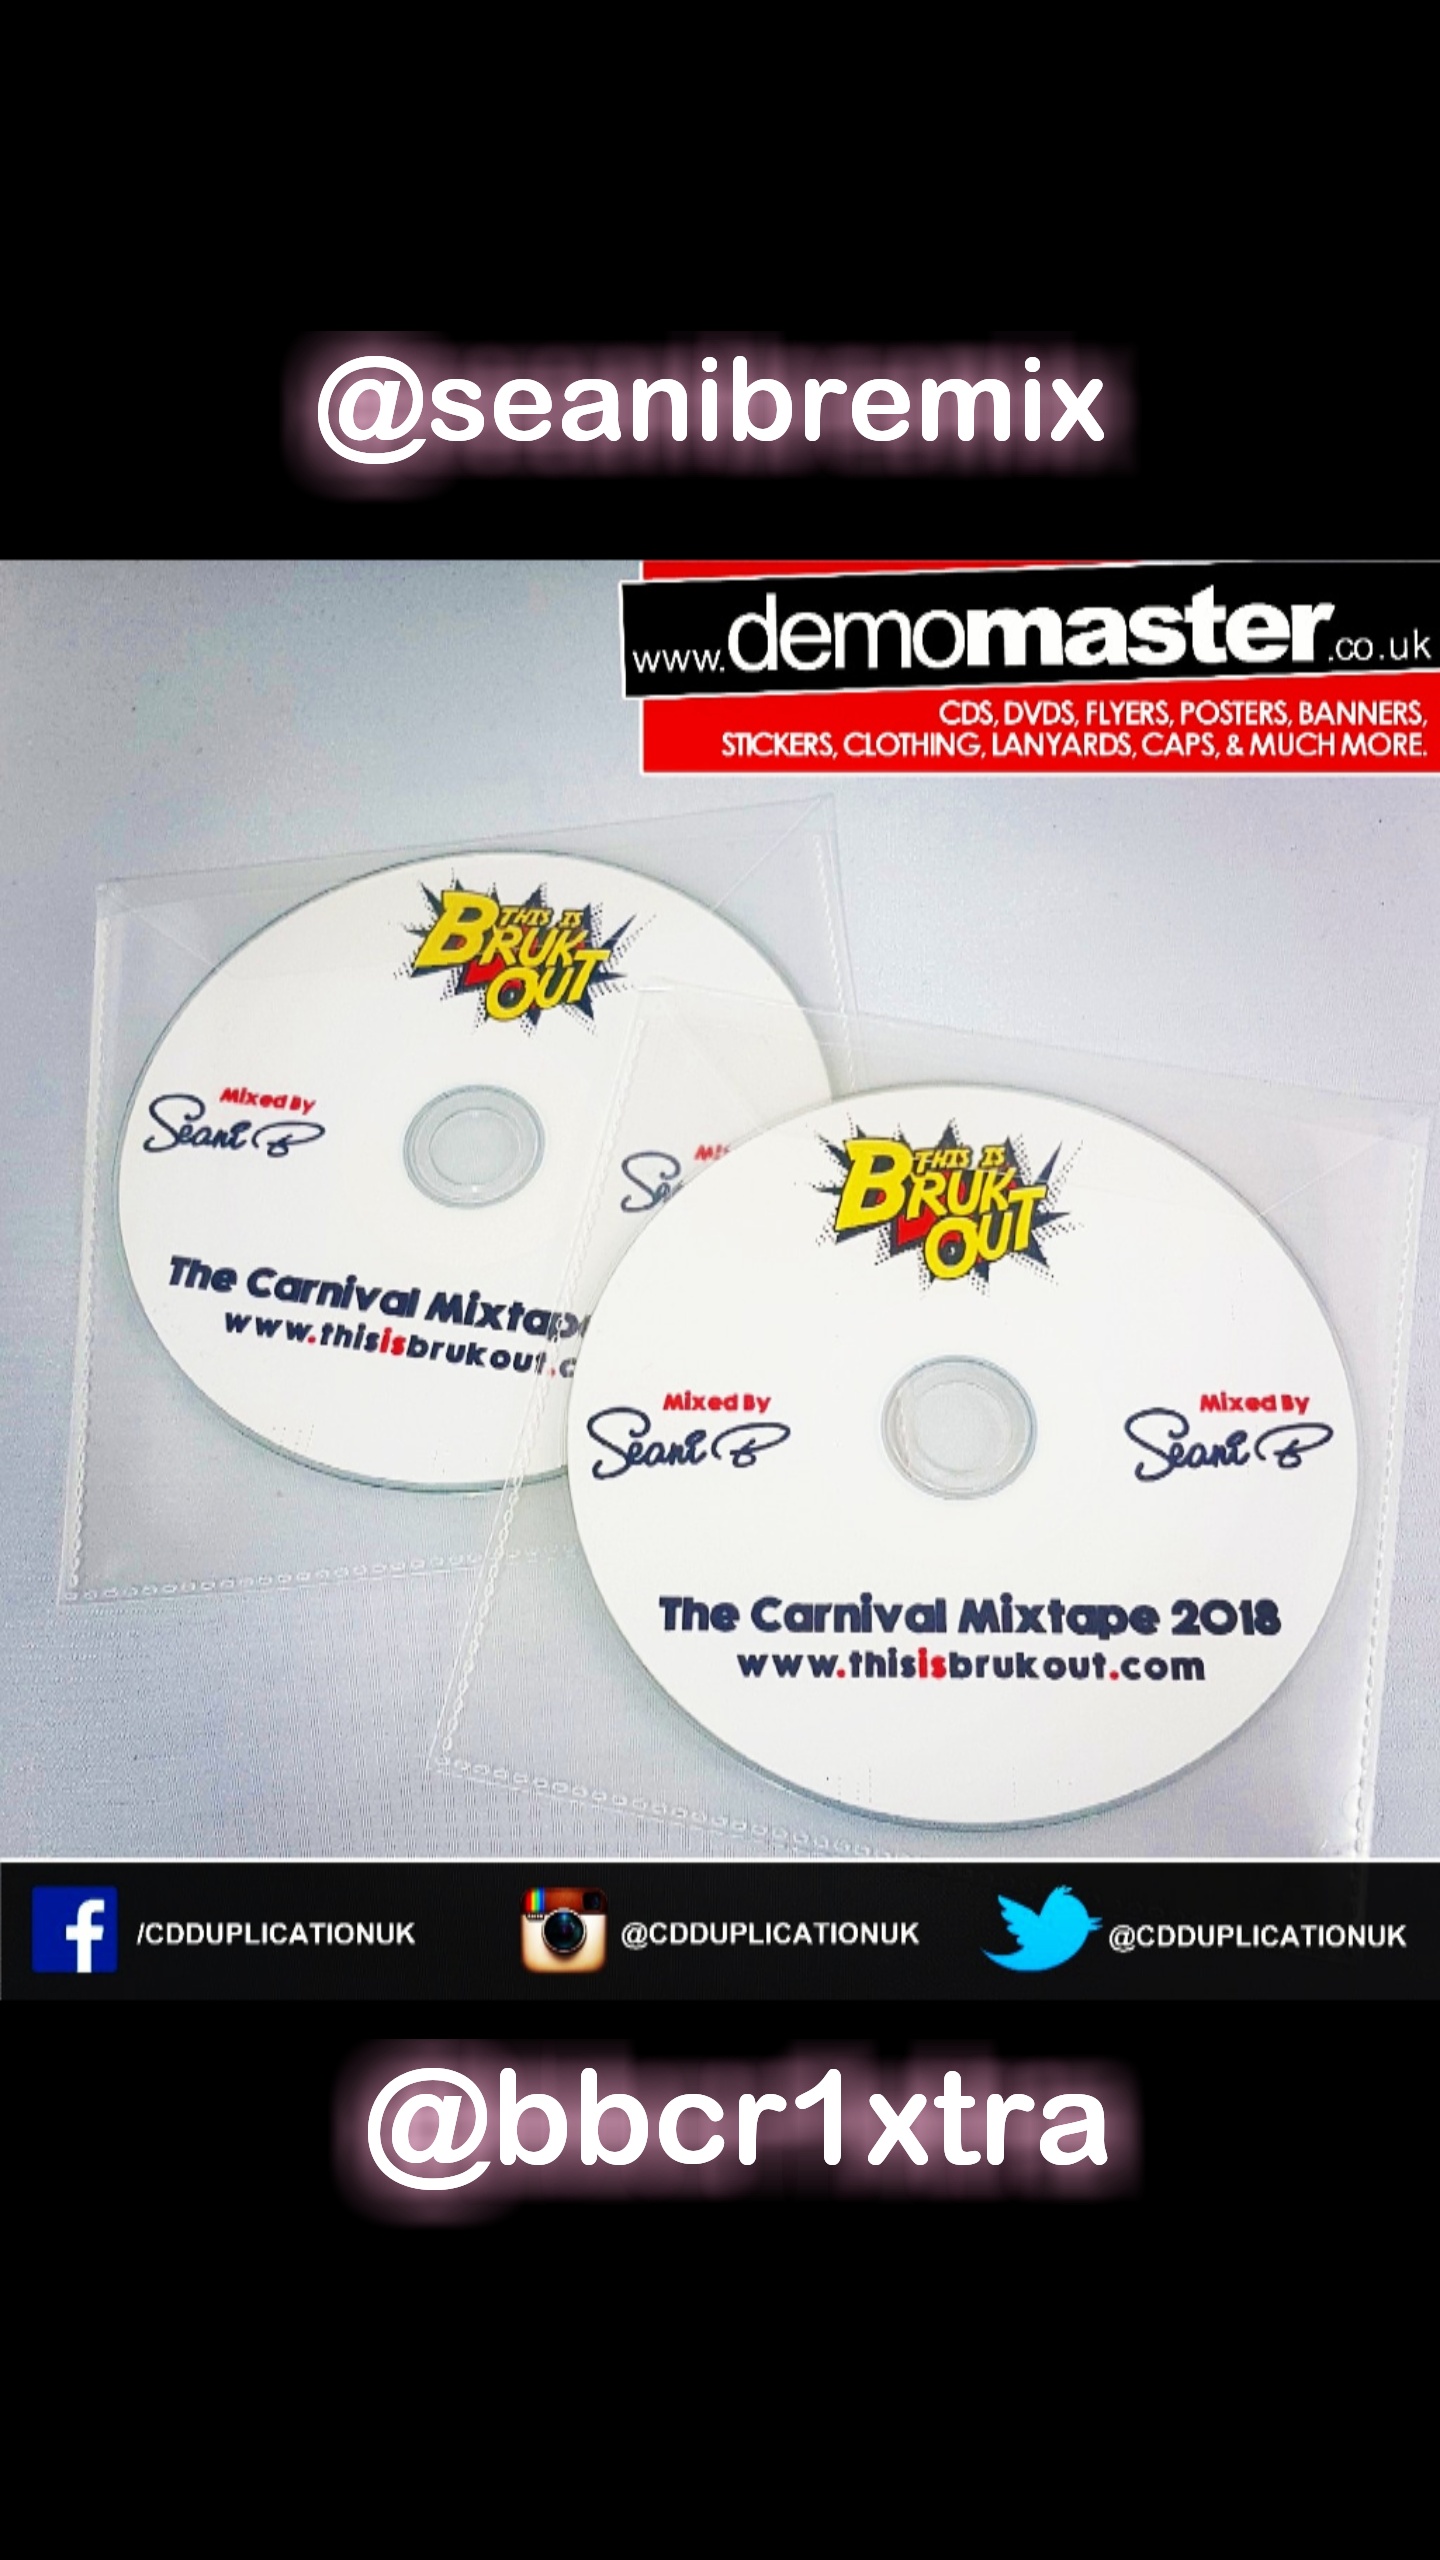 24hr turnaround for CD Duplication and DVD